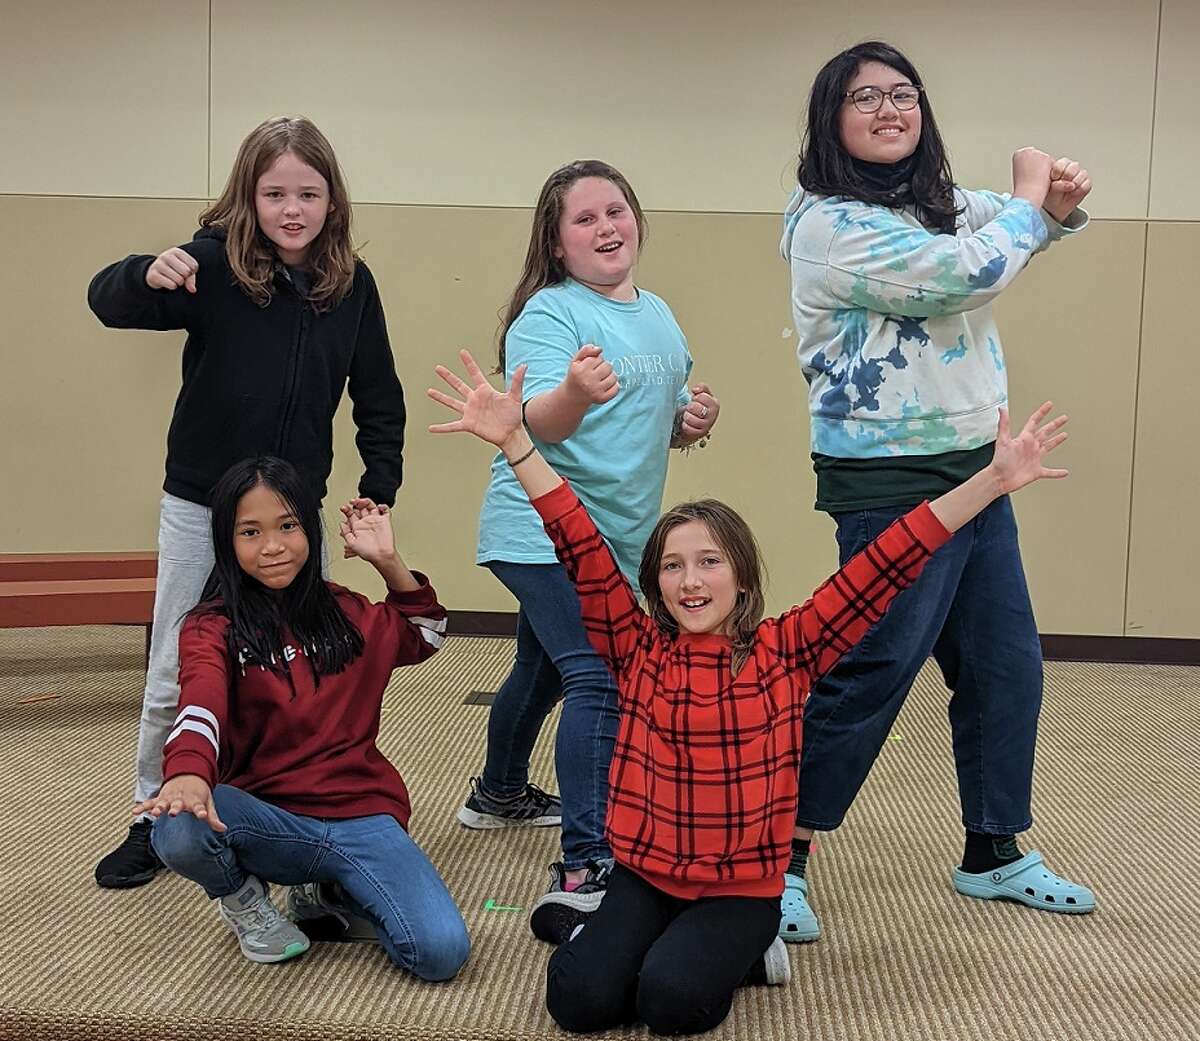 Miles Kessling, Madelin Marquez, Mabre Cole, Aria Townsend and Ariana Lim portray the Herdman kids in in Kids’ Backporch Productions’ "The Best Christmas Pageant Ever,” Not pictured is Helen Zhou. The KBP production is scheduled at 7 p.m. Dec. 9-10 and 2 p.m. Dec. 10-11.